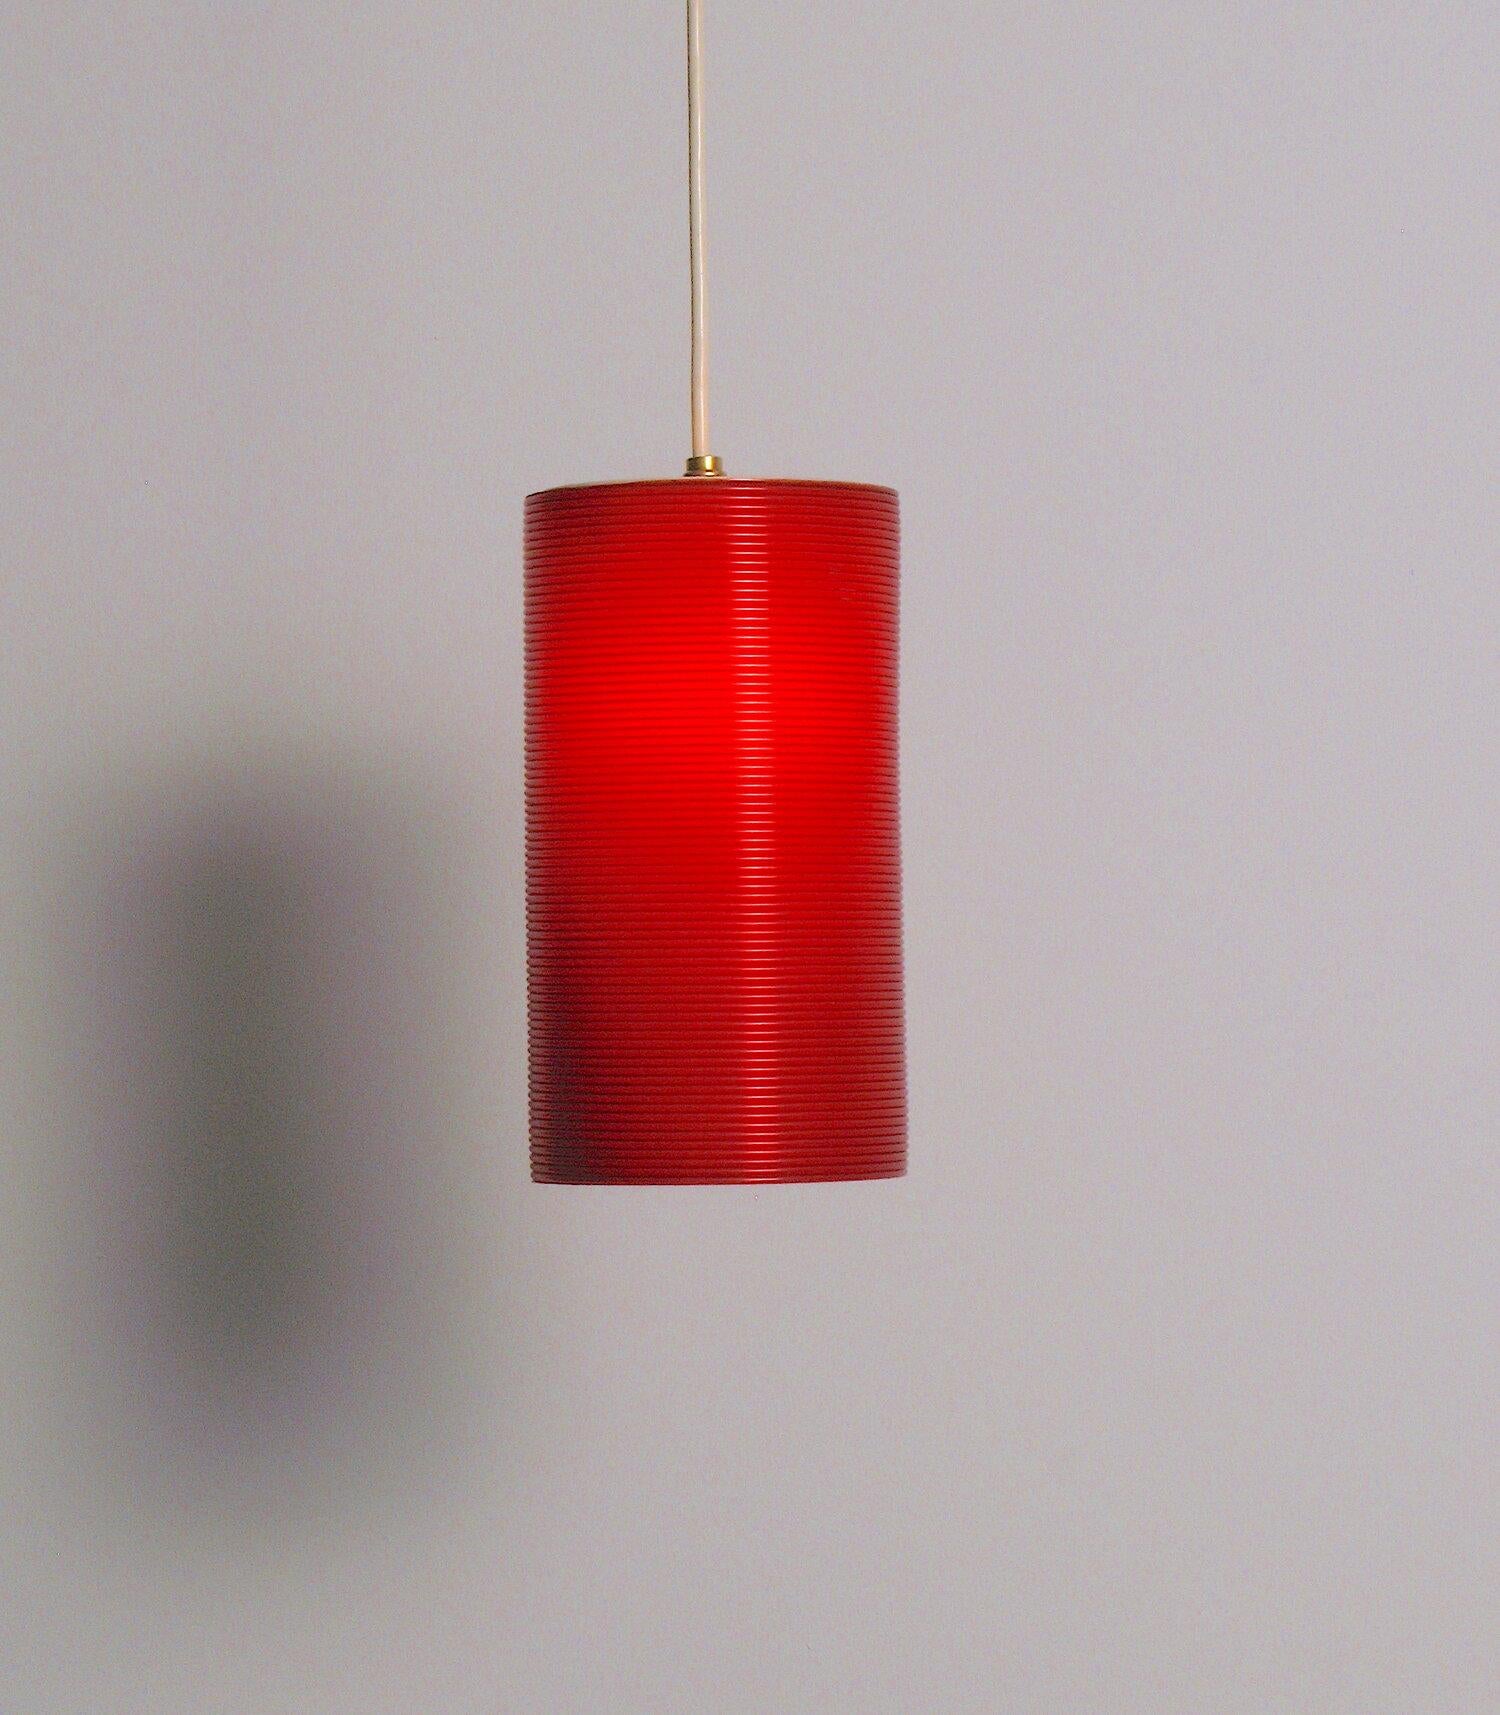 Ruby red tubular lamp designed by John and Sylvia Reid for Rotaflex. Rewired with a E-12 candelabra base socket and round plastic cord.